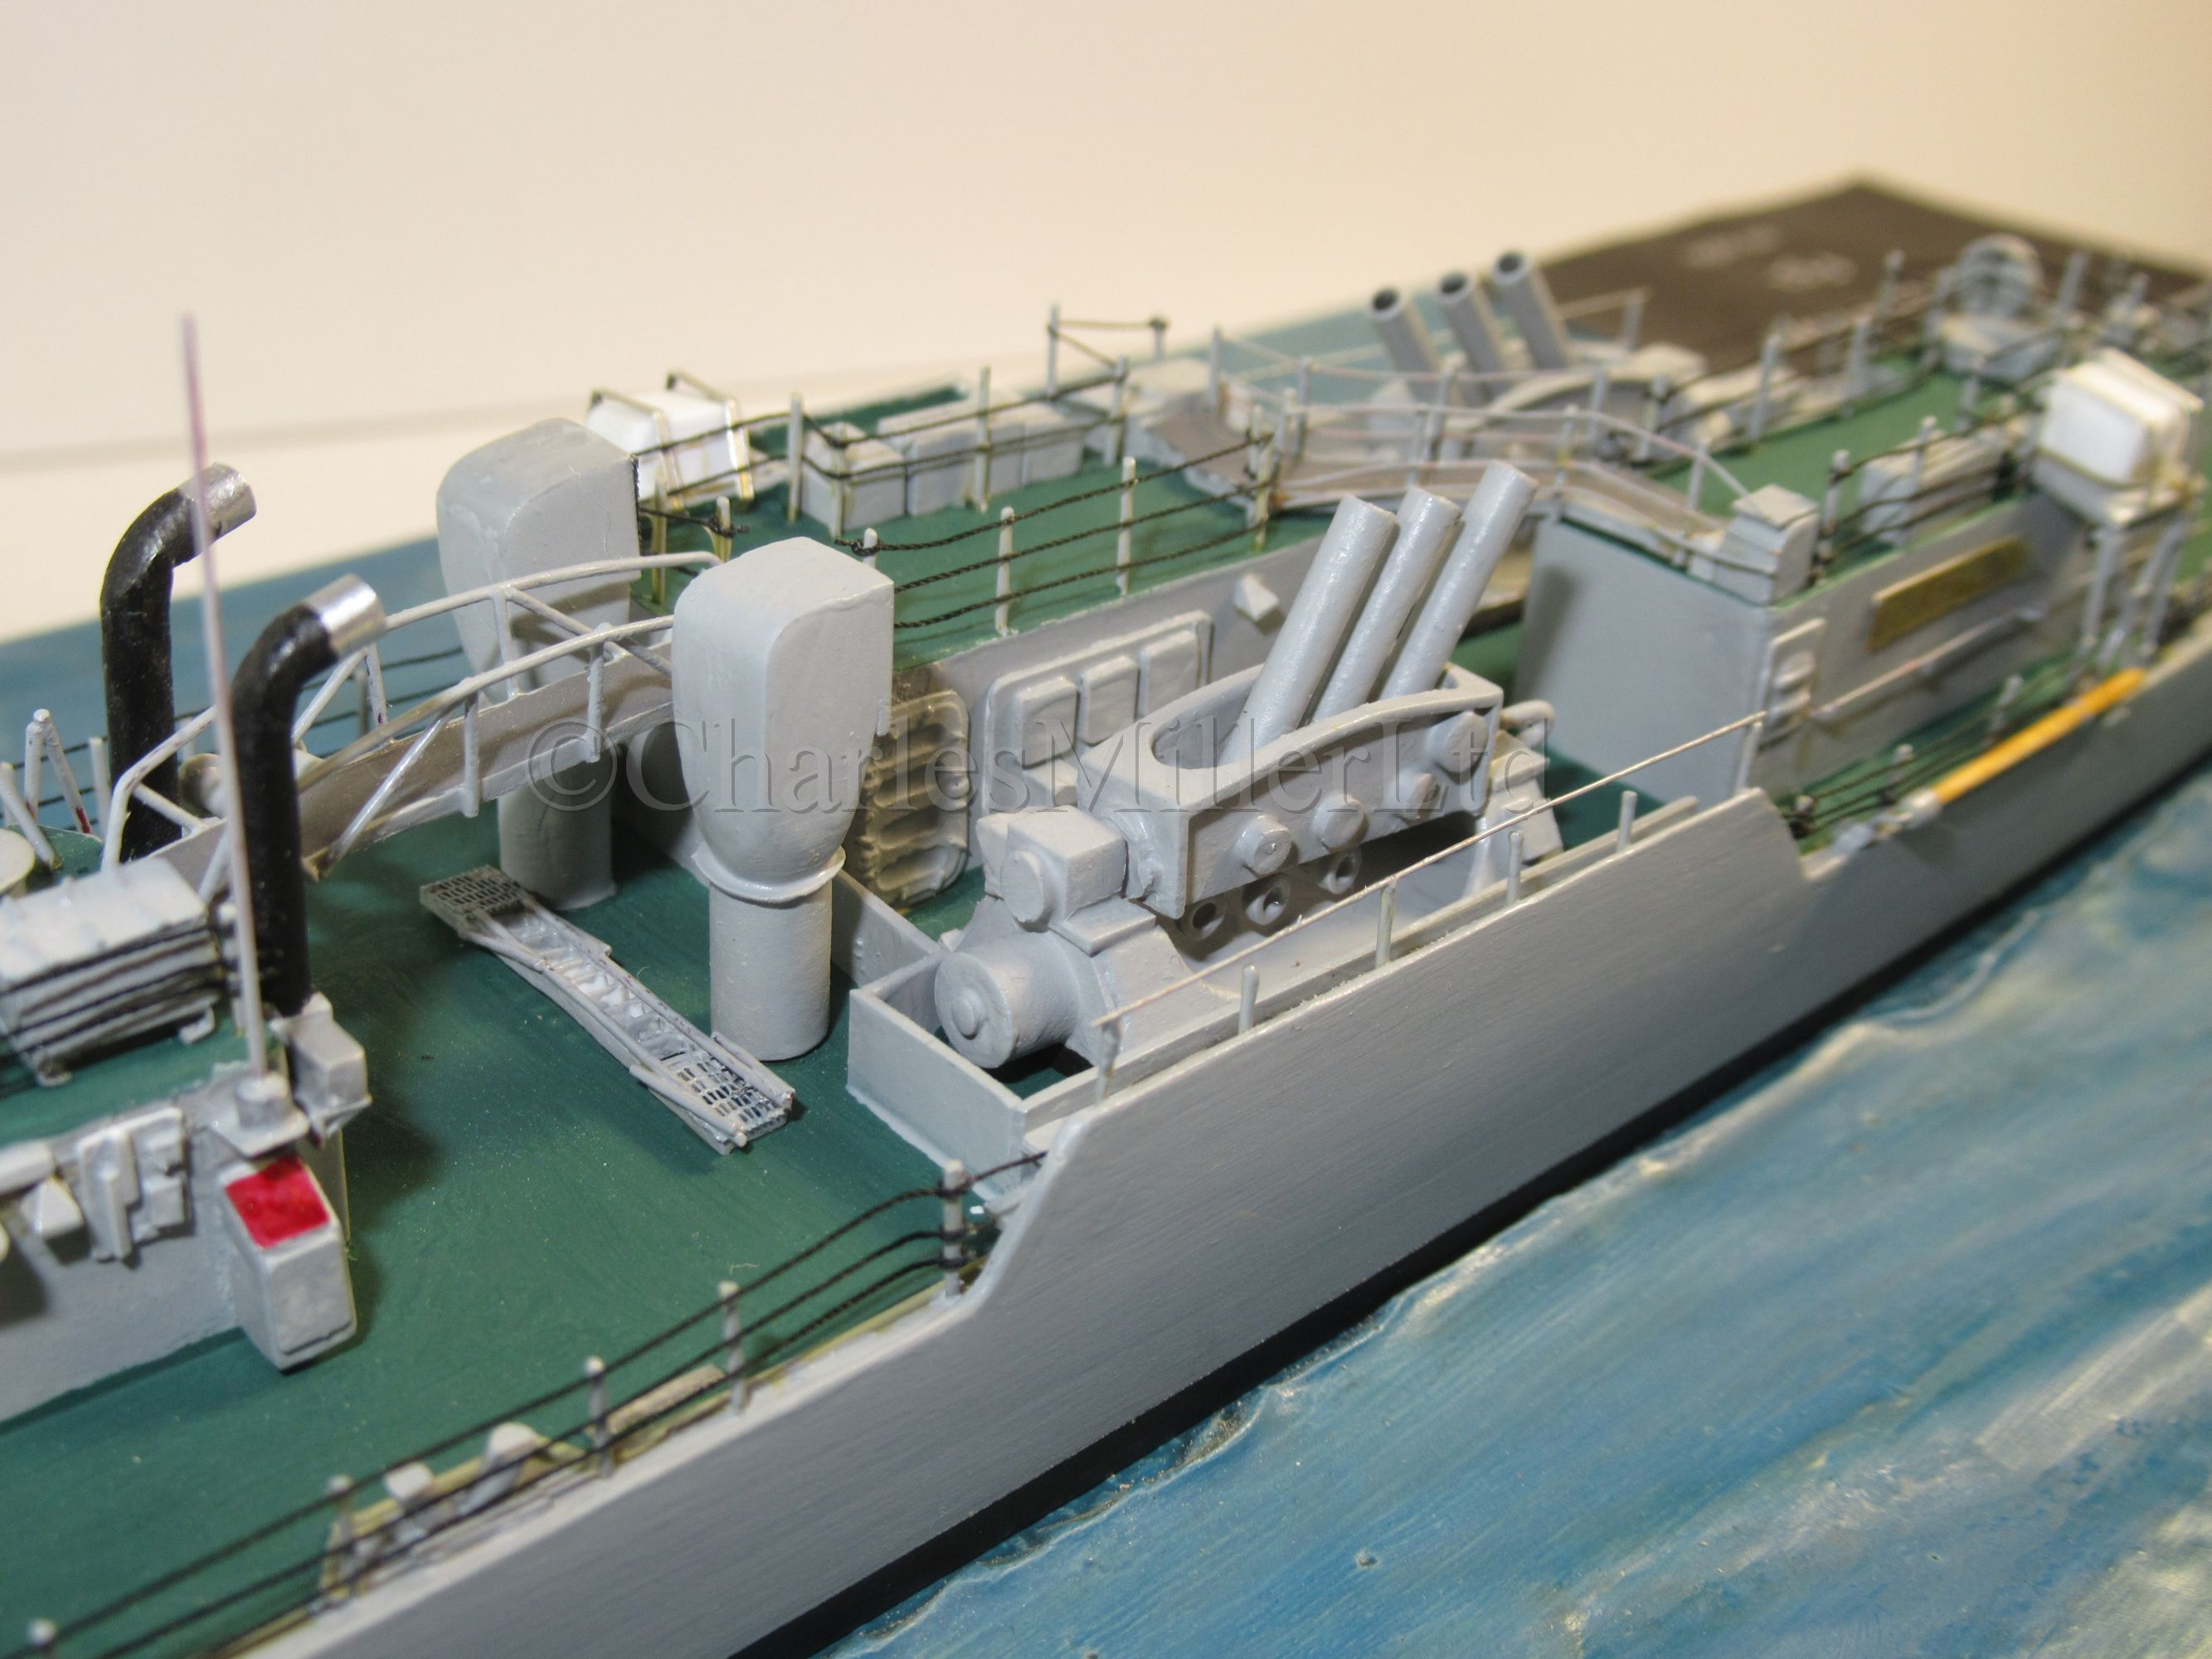 A 1:192 WATERLINE MODEL FOR THE TYPE 14 BLACKWOOD CLASS FRIGATE HMS GRAFTON (F51), AS FITTED IN - Image 11 of 14